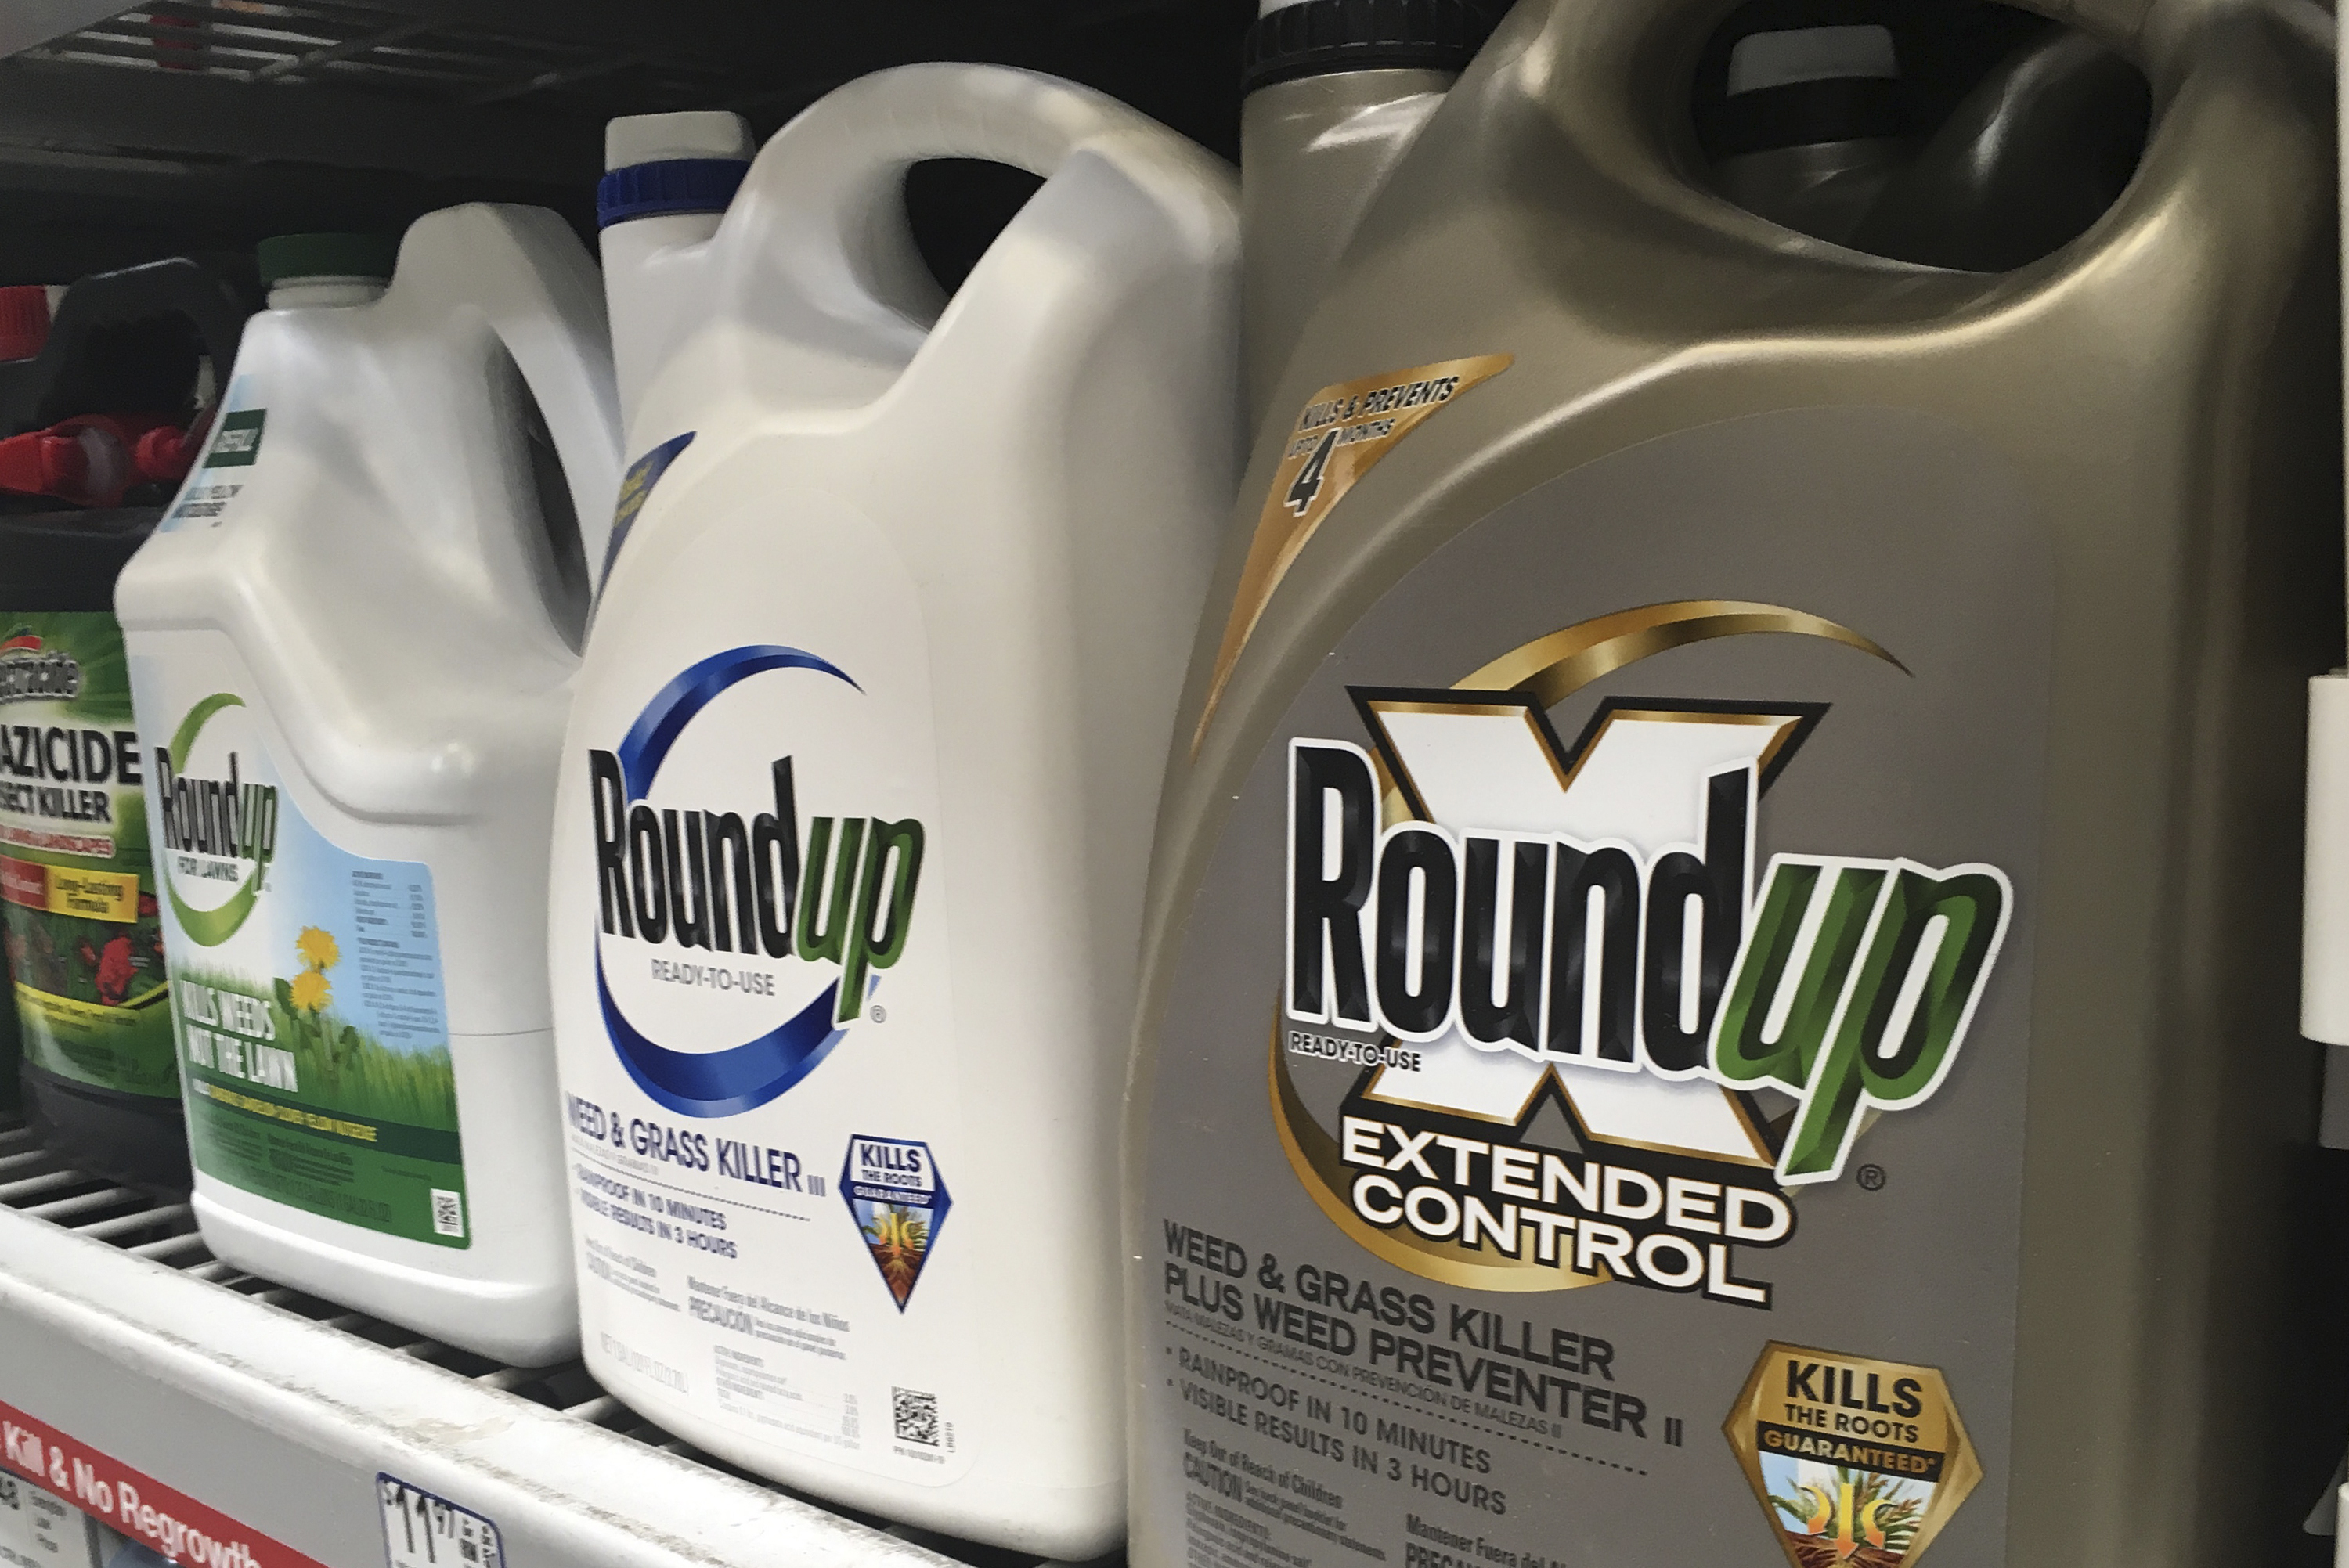 Roundup weed killer verdict in Philly cancer-claim case: $175 million